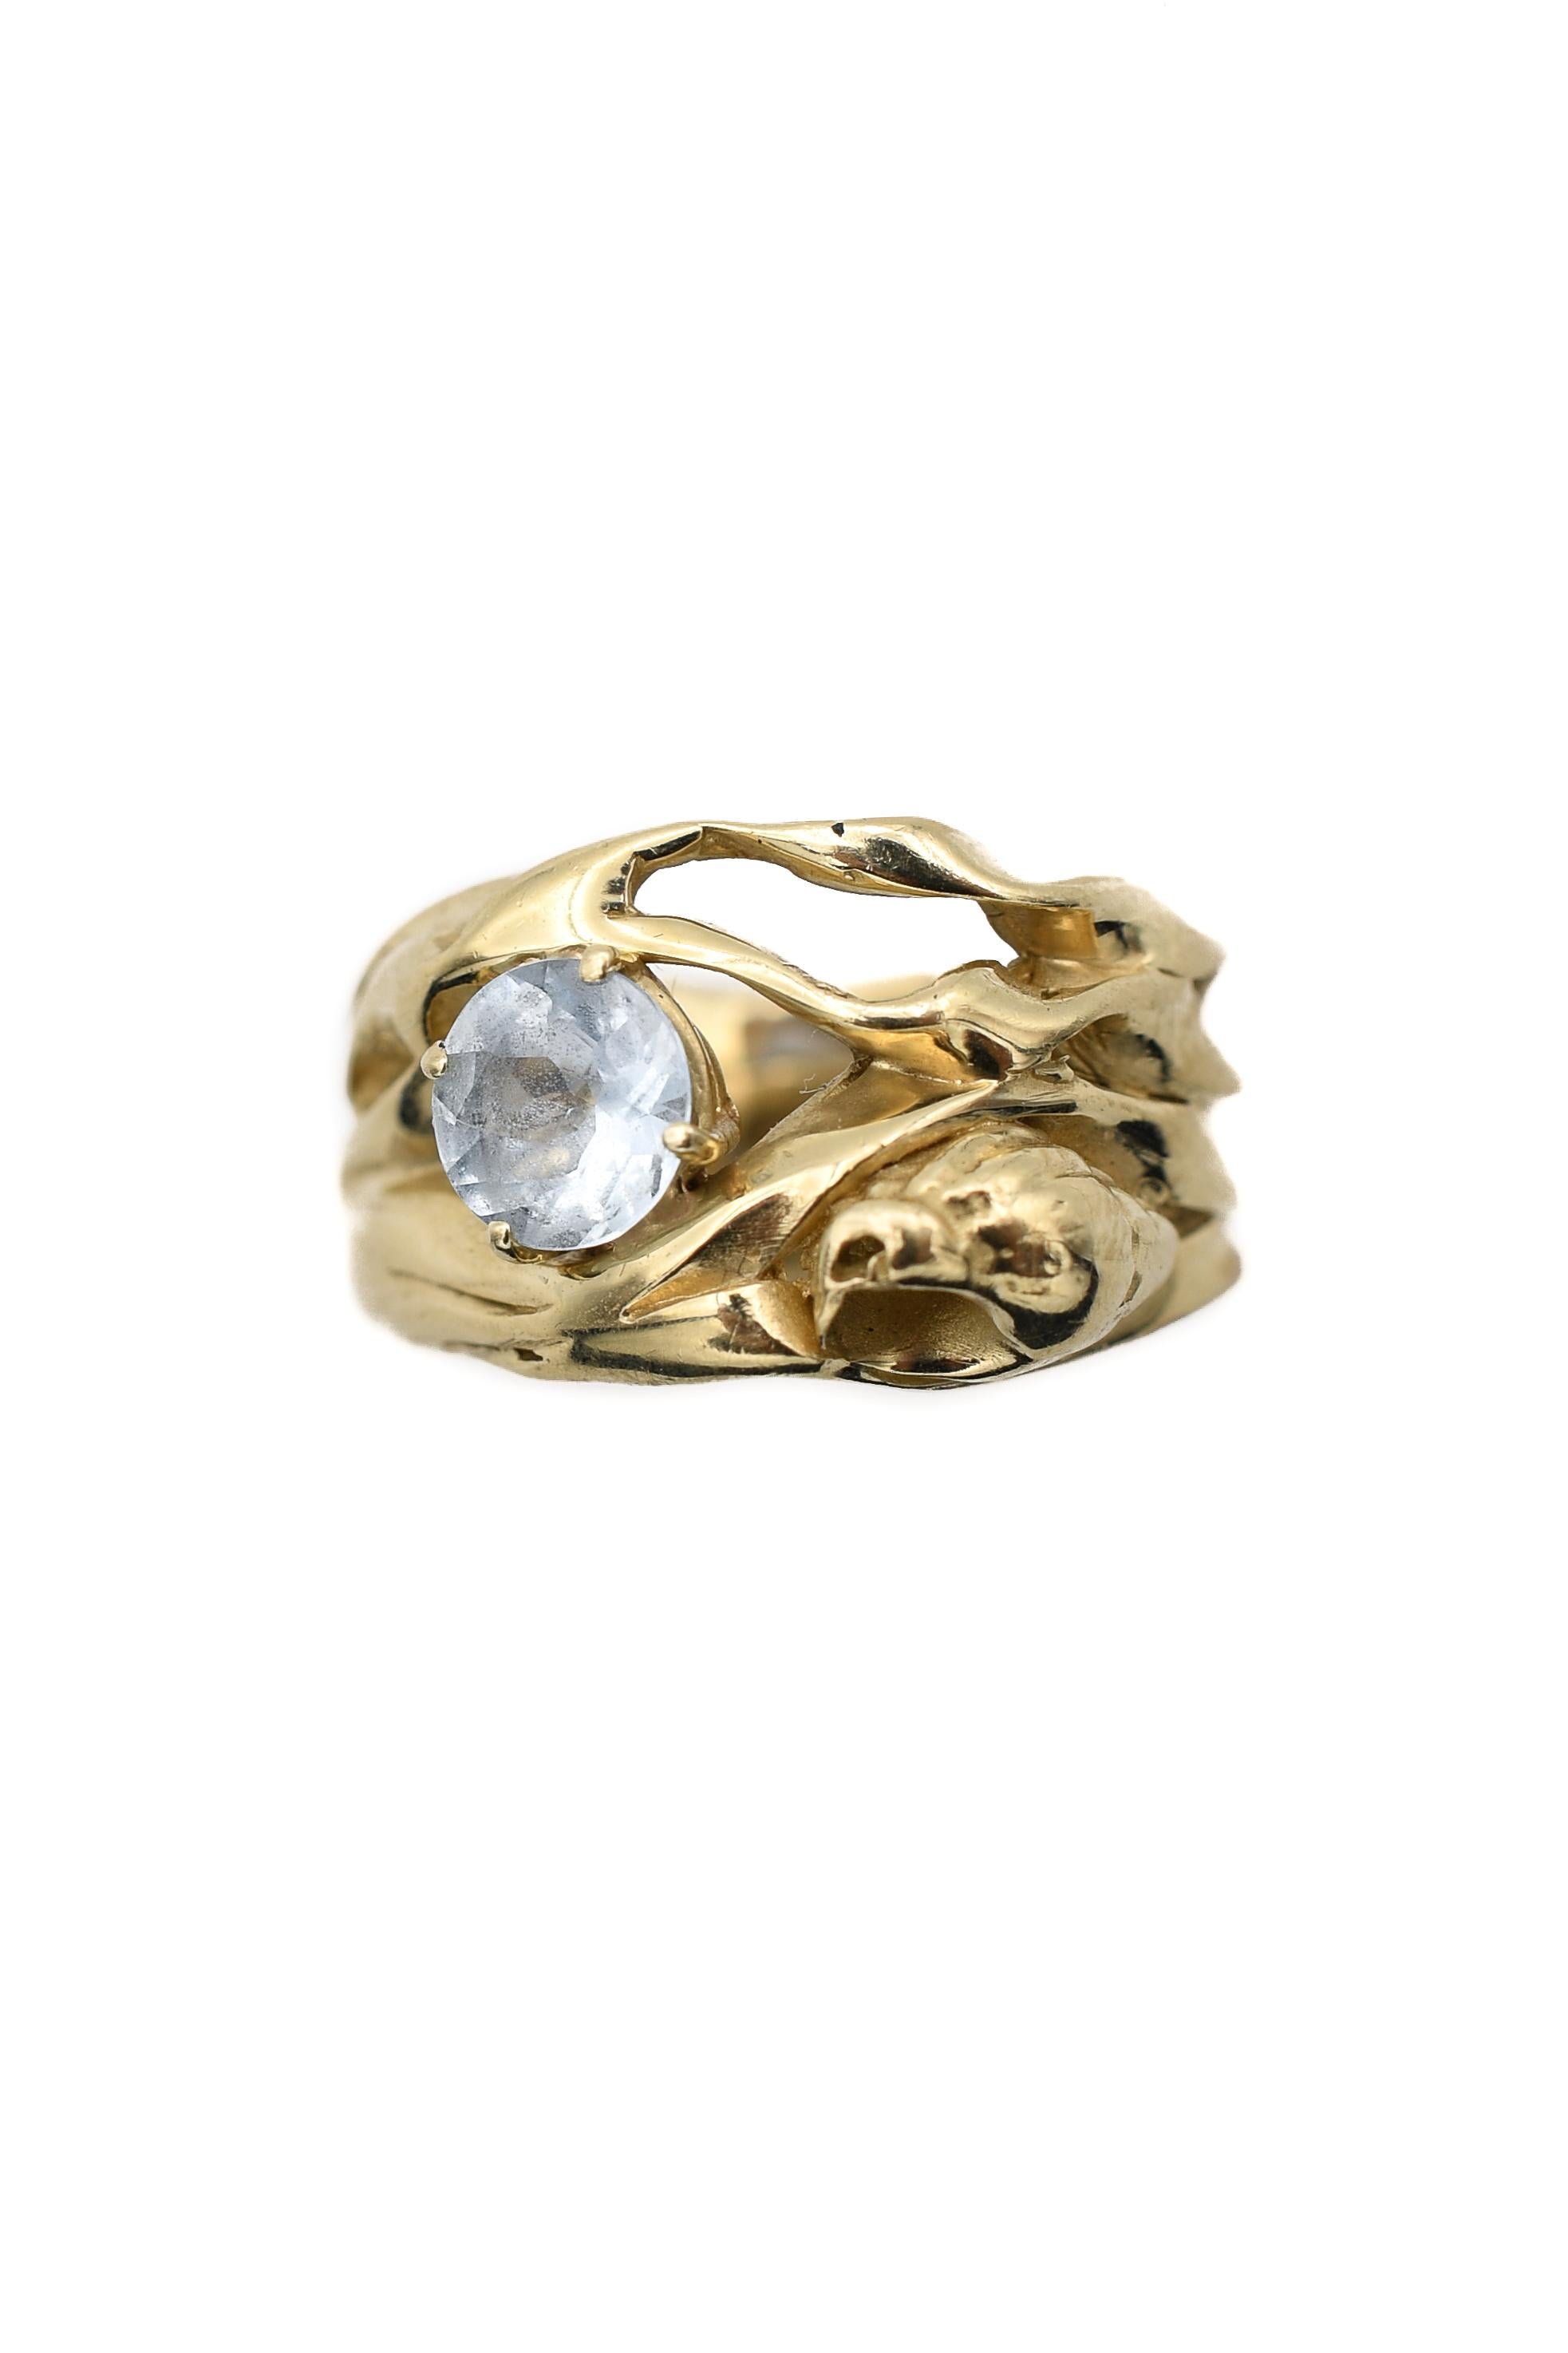 Latasha Lamar Topaz Adella Ring in 14K Gold In New Condition For Sale In Brooklyn, NY